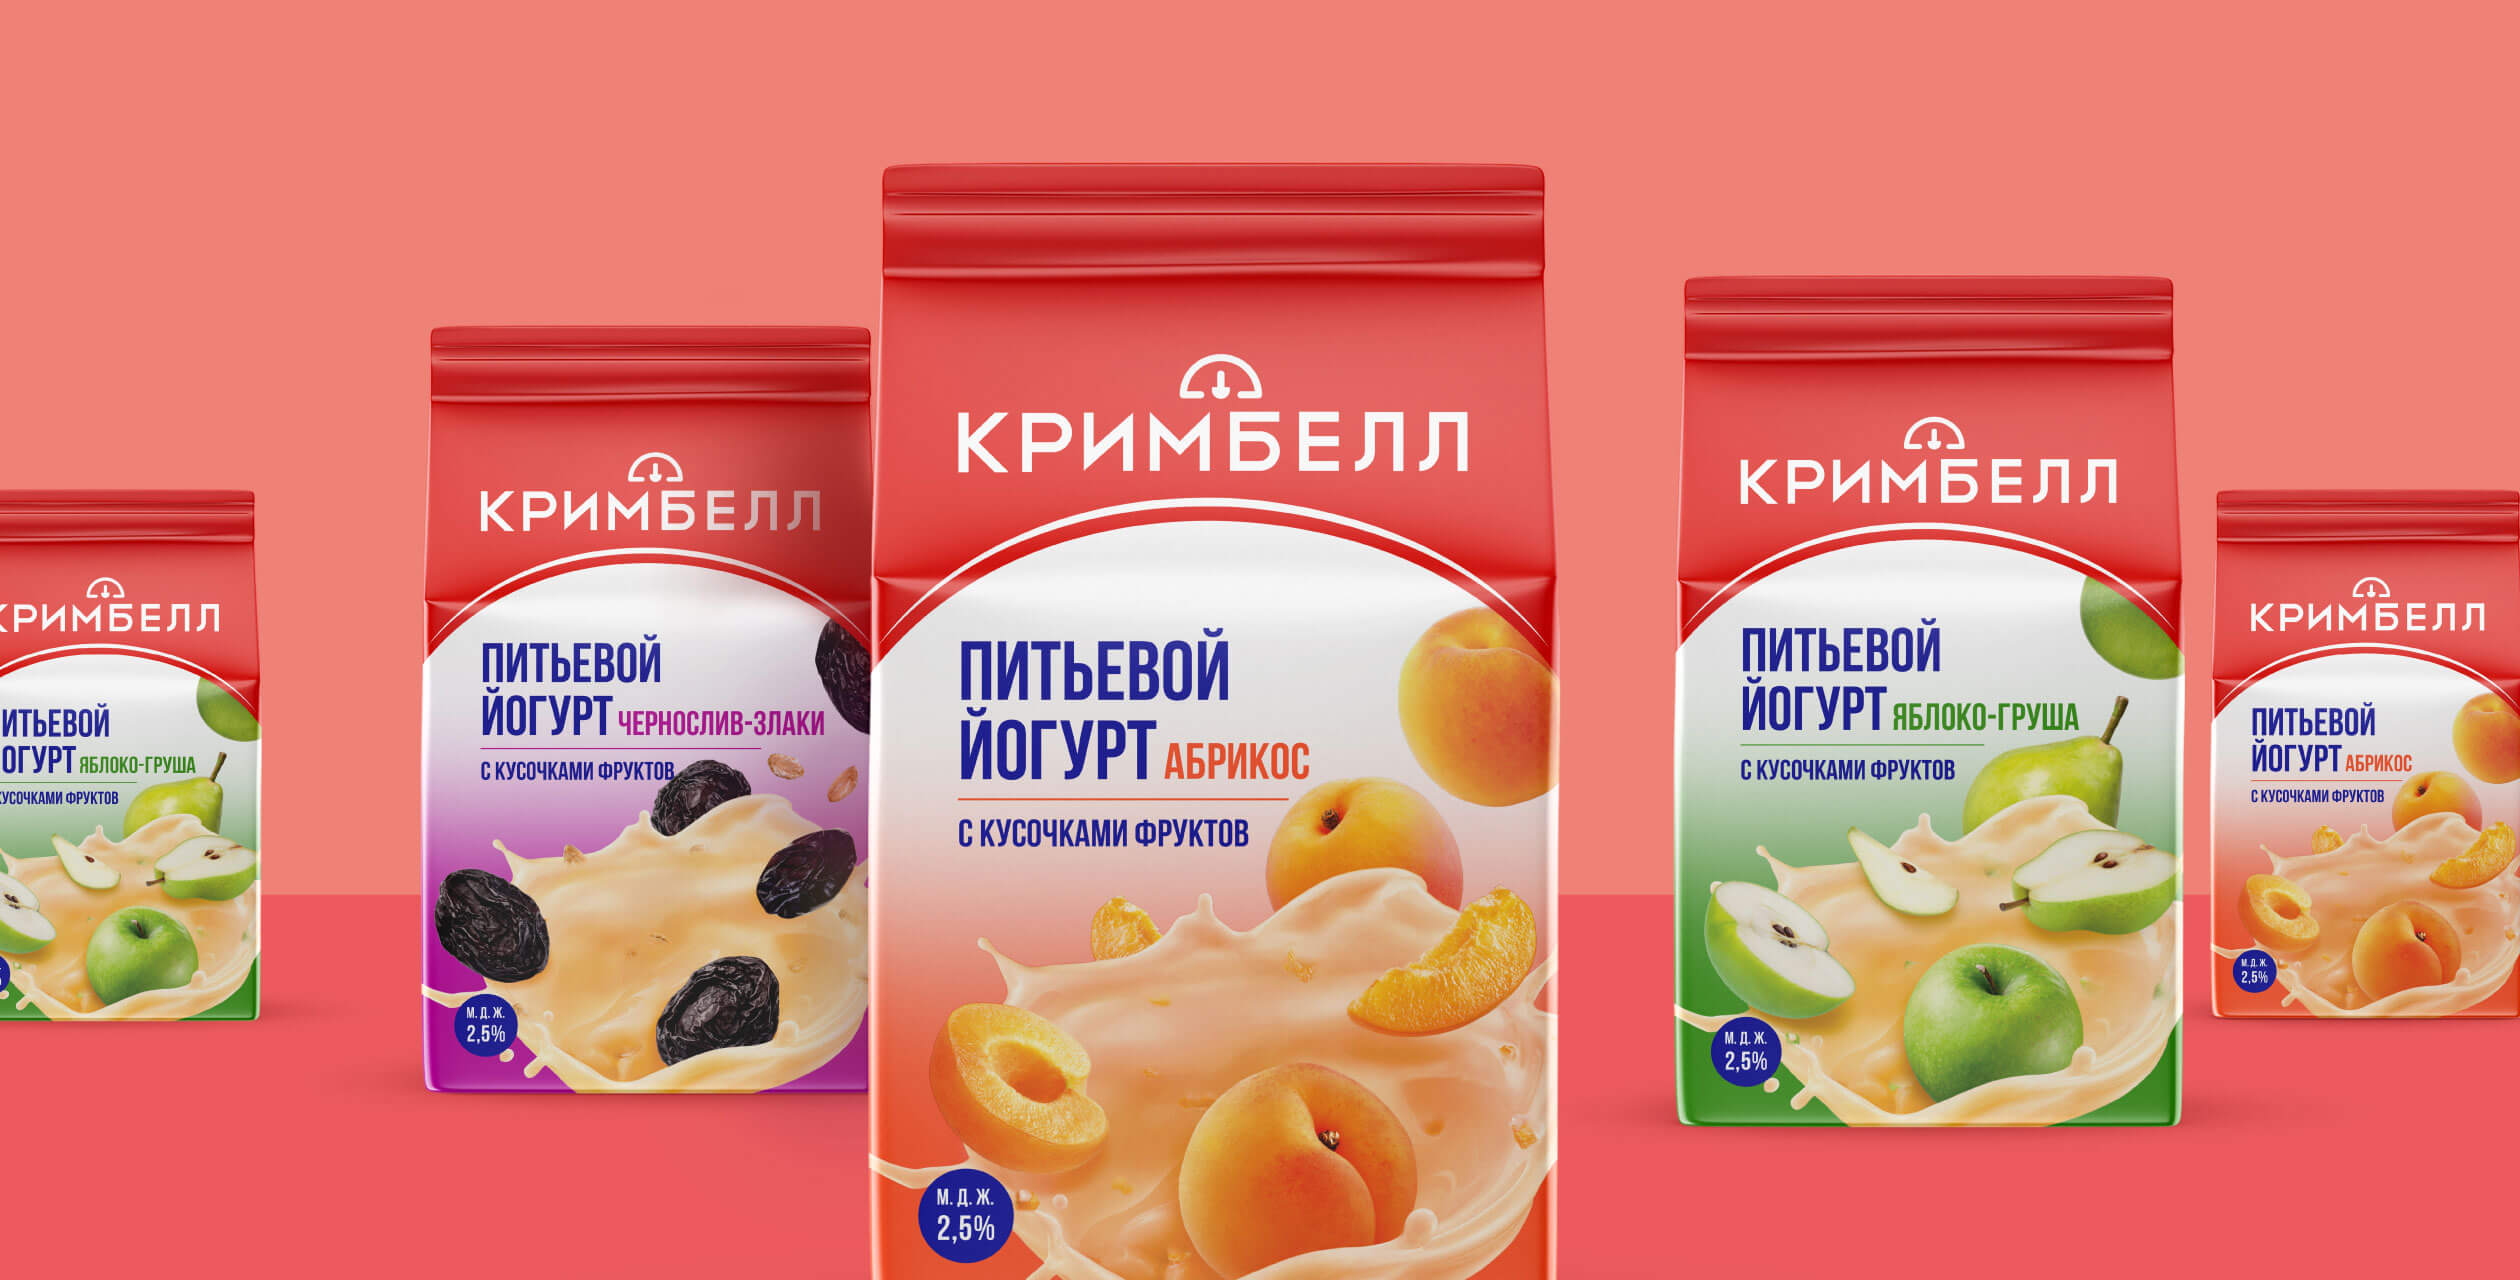 16.-Creambell-Russia-Dairy